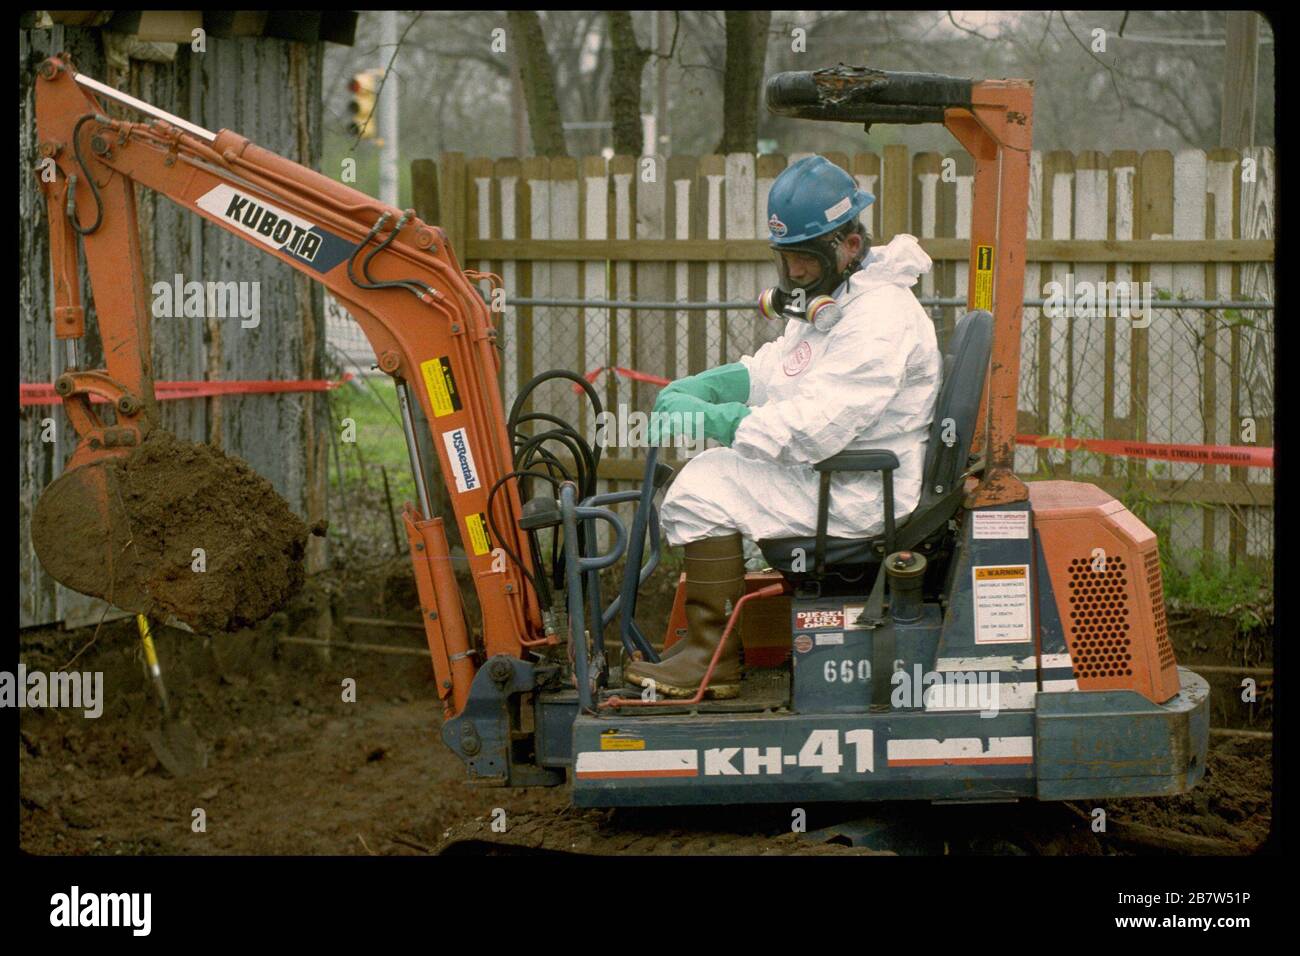 Austin Texas USA: Worker wearing protective gear uses a backhoe to remove lead from property in residential neighborhood.    ©Bob Daemmrich Stock Photo